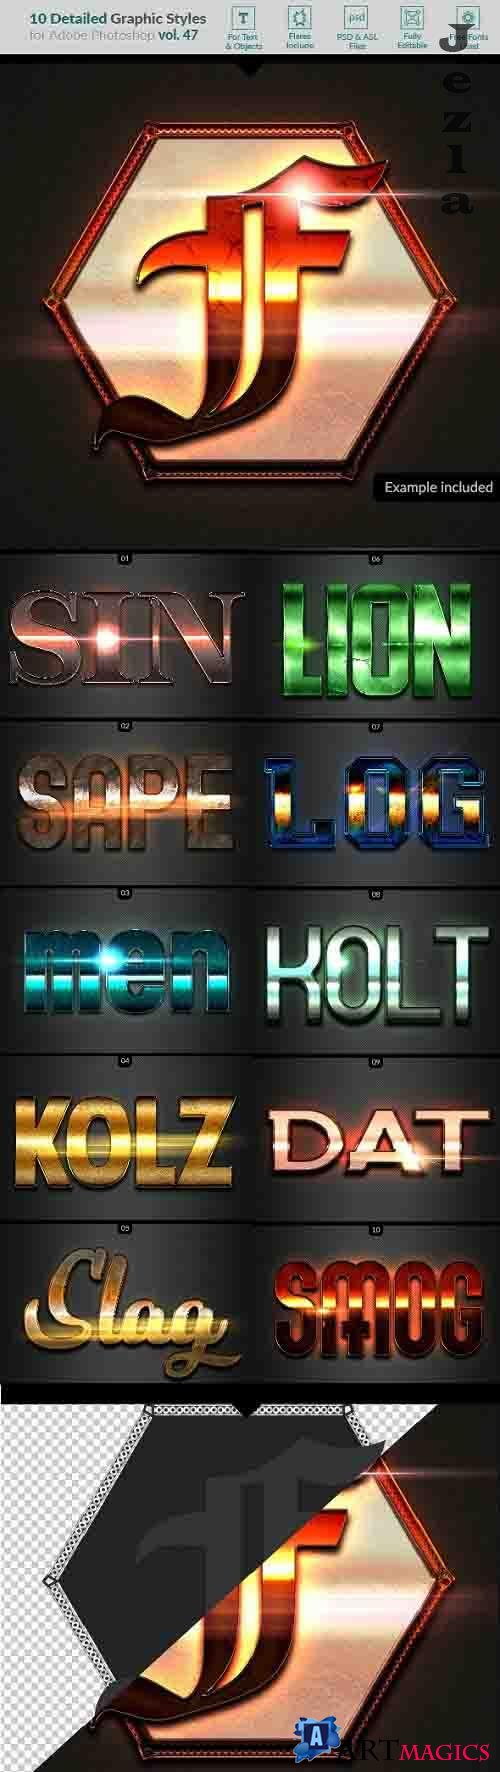 10 Text Effects Vol. 47 - 25885055